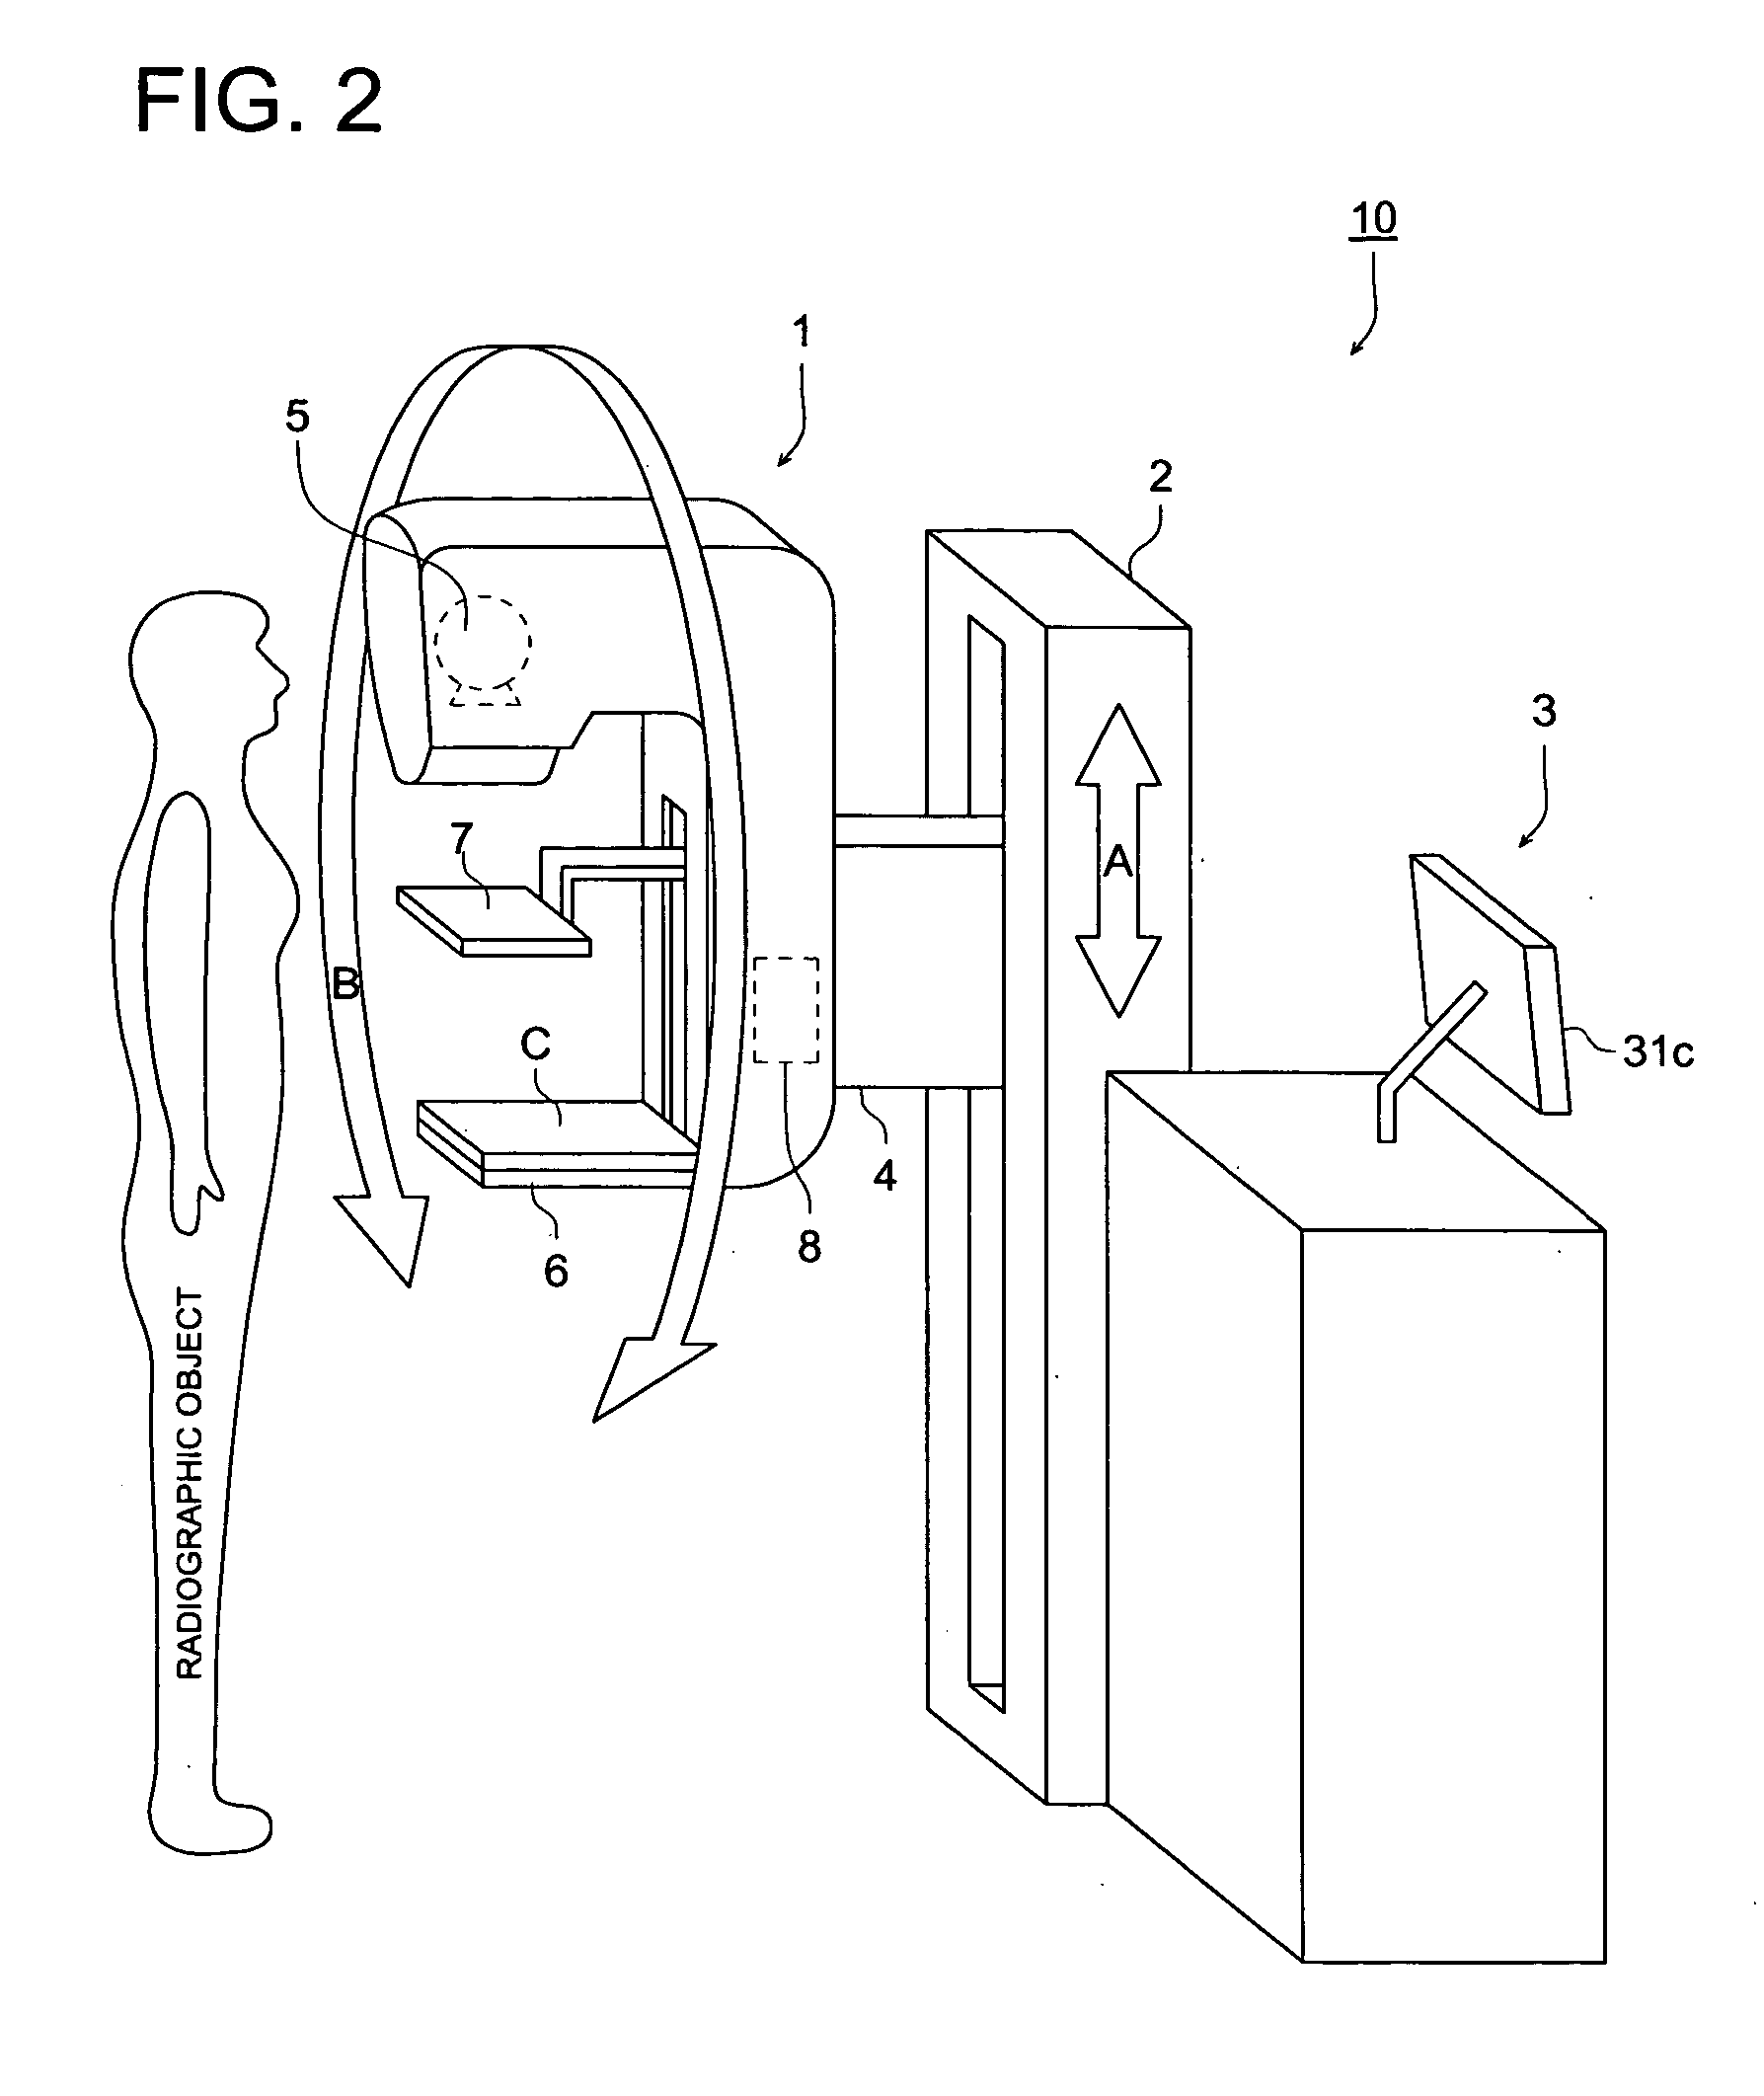 Mammographic system and apparatus